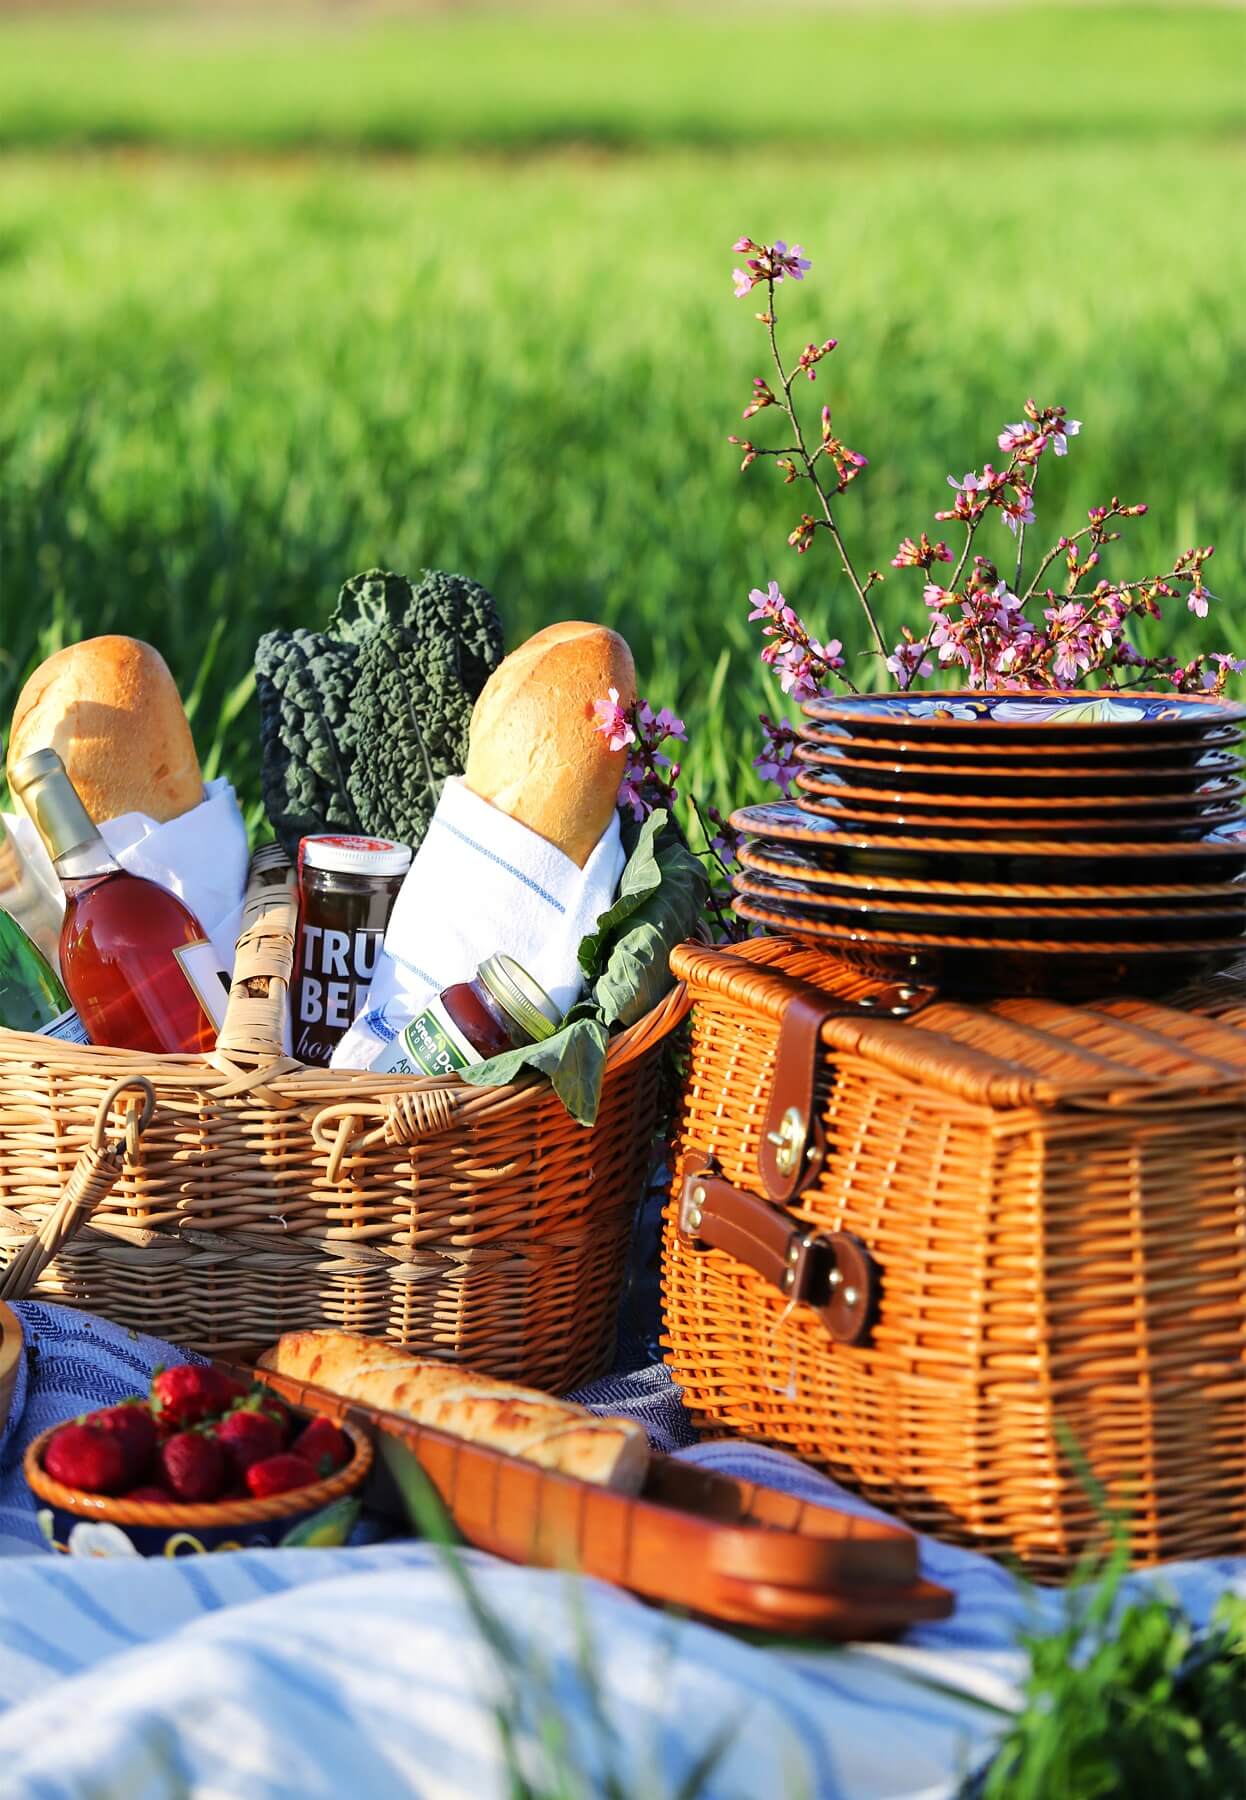 Celebrate Spring By Packing The Perfect Picnic